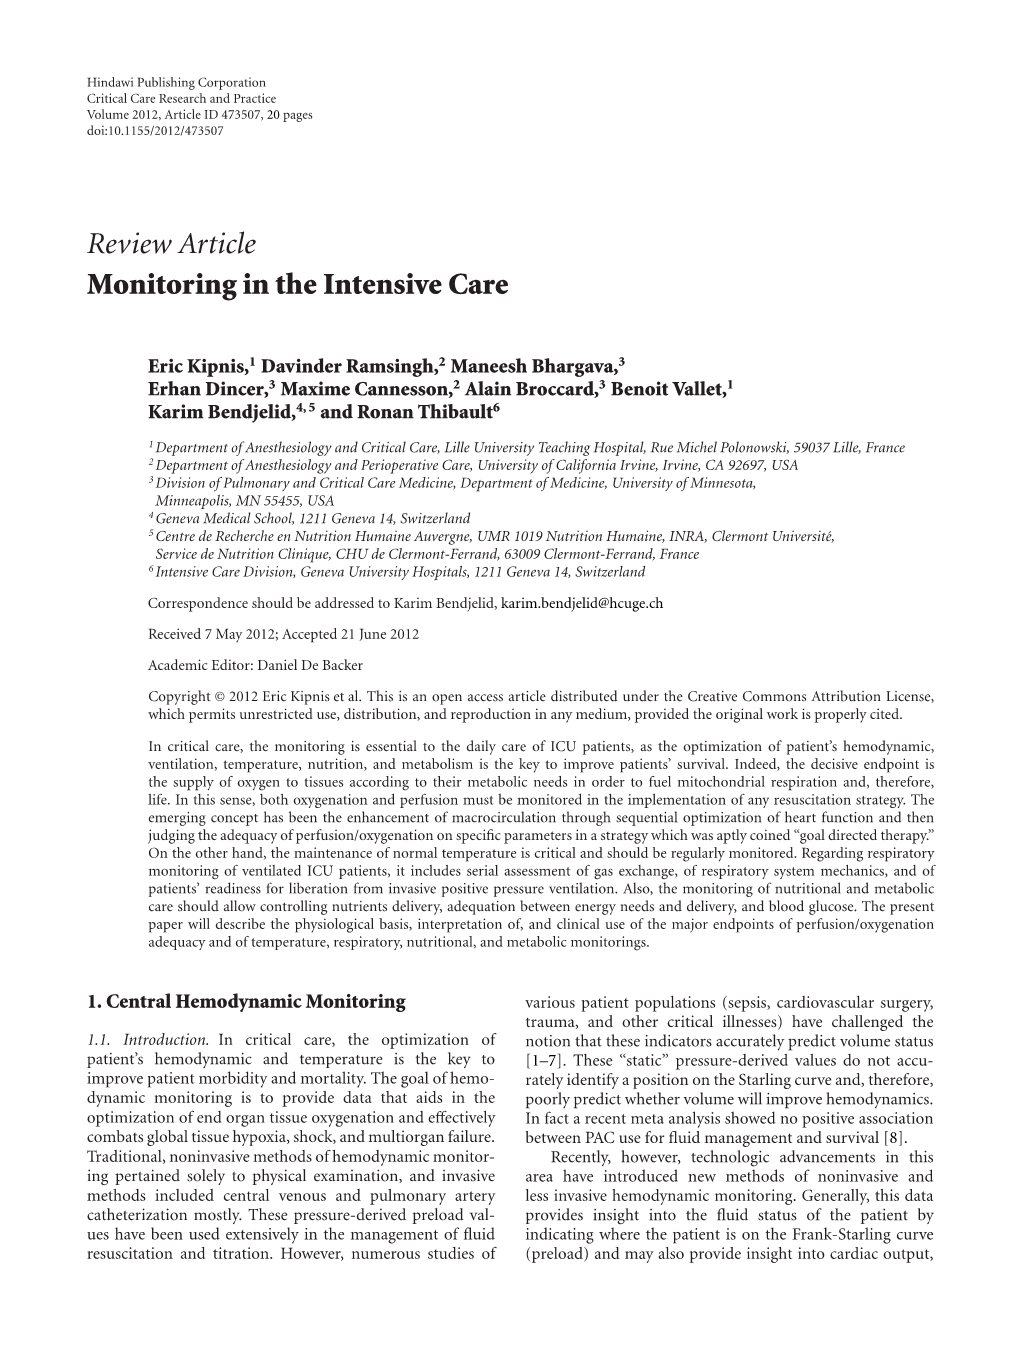 Review Article Monitoring in the Intensive Care